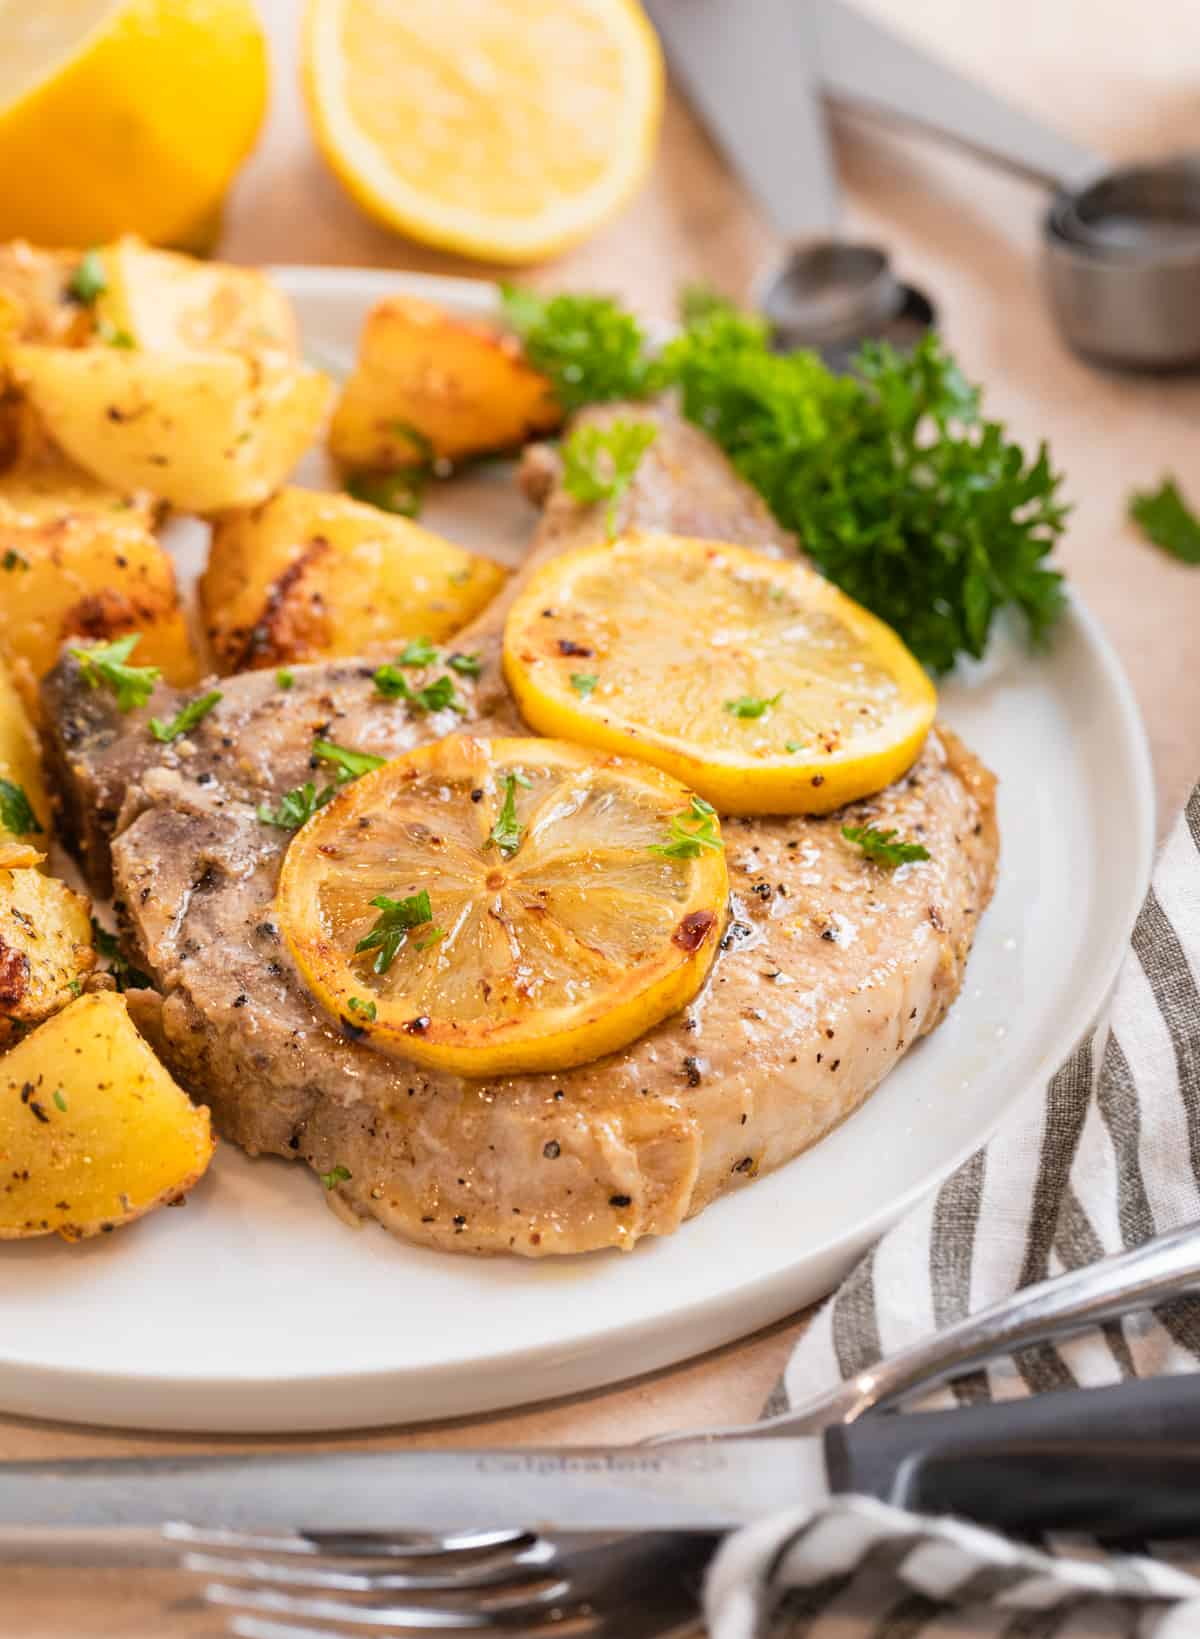 Pork chop and potatoes on white plate with parsley and sliced lemons over top.